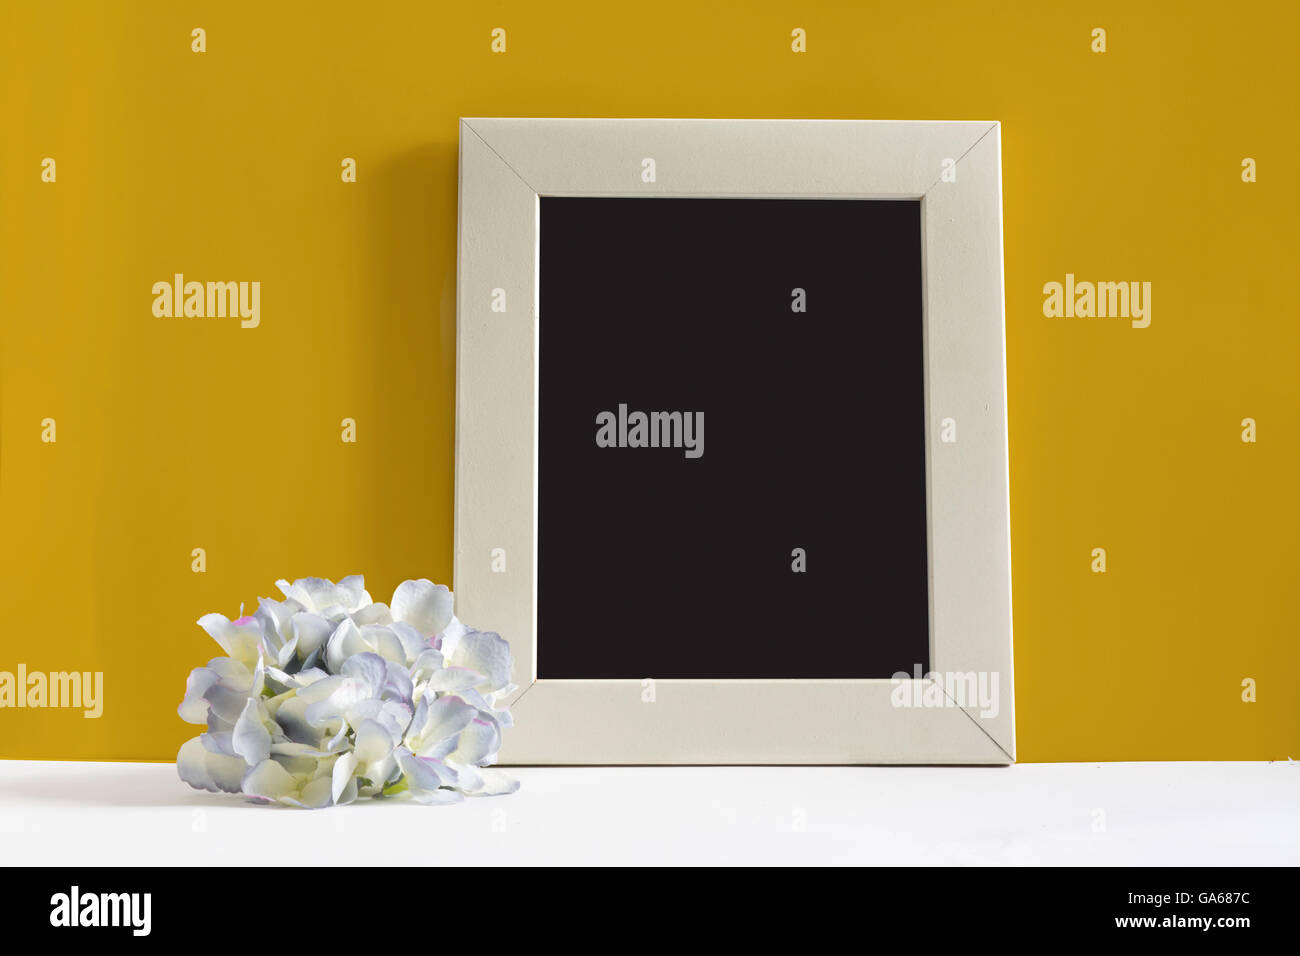 empty picture frame on yellow background, decorated with blue flower Stock Photo